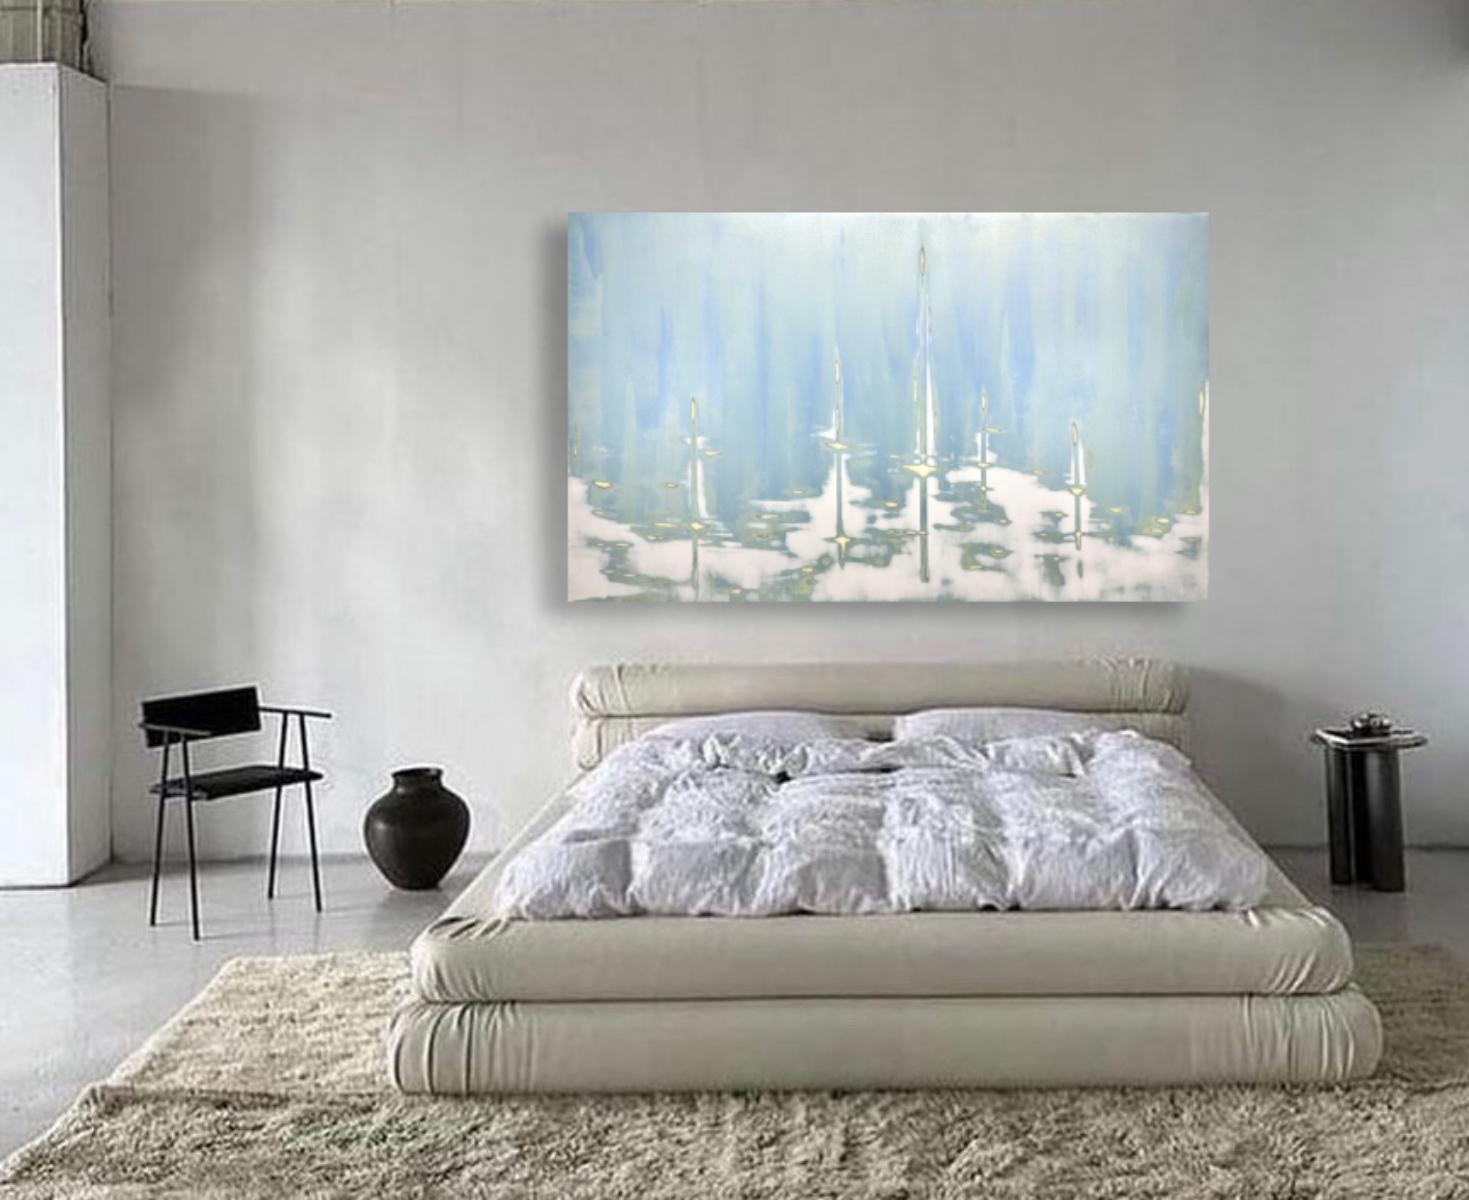 Luminous Blue/Silver Metallic Painting by Audra Weaser/ Drifting Tides 2